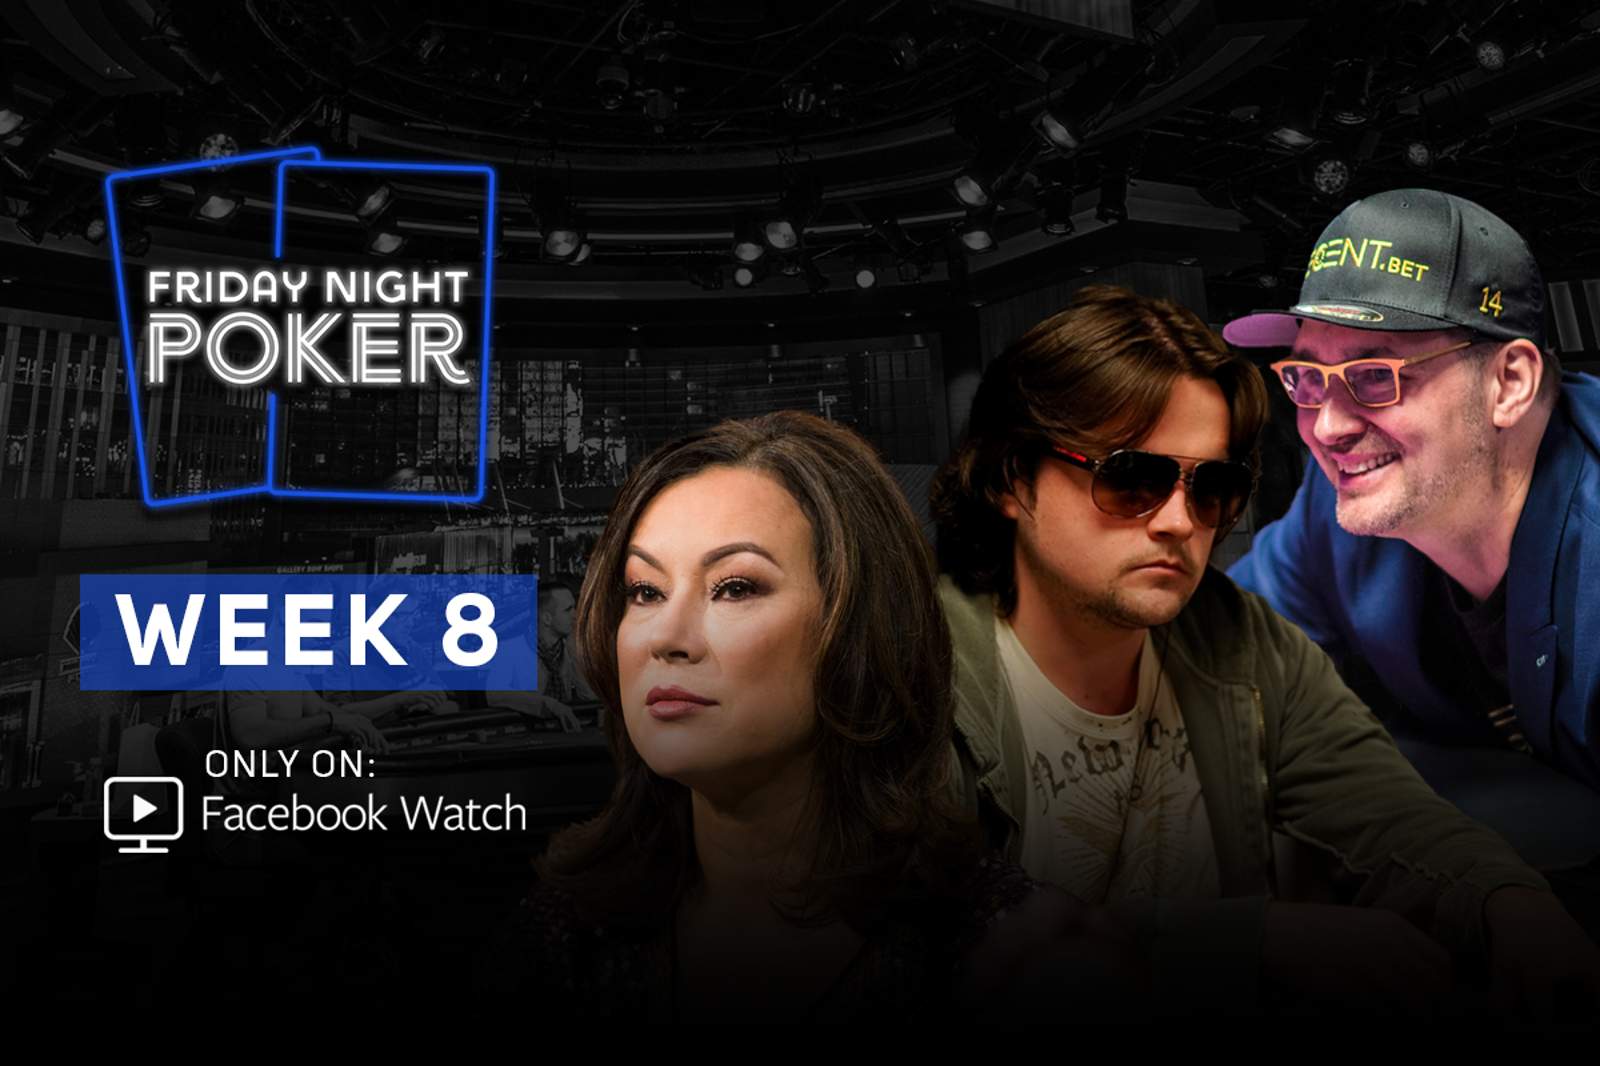 Sopranos Star Rob Iler Flanked by Tilly and Hellmuth on Week 8 of Friday Night Poker